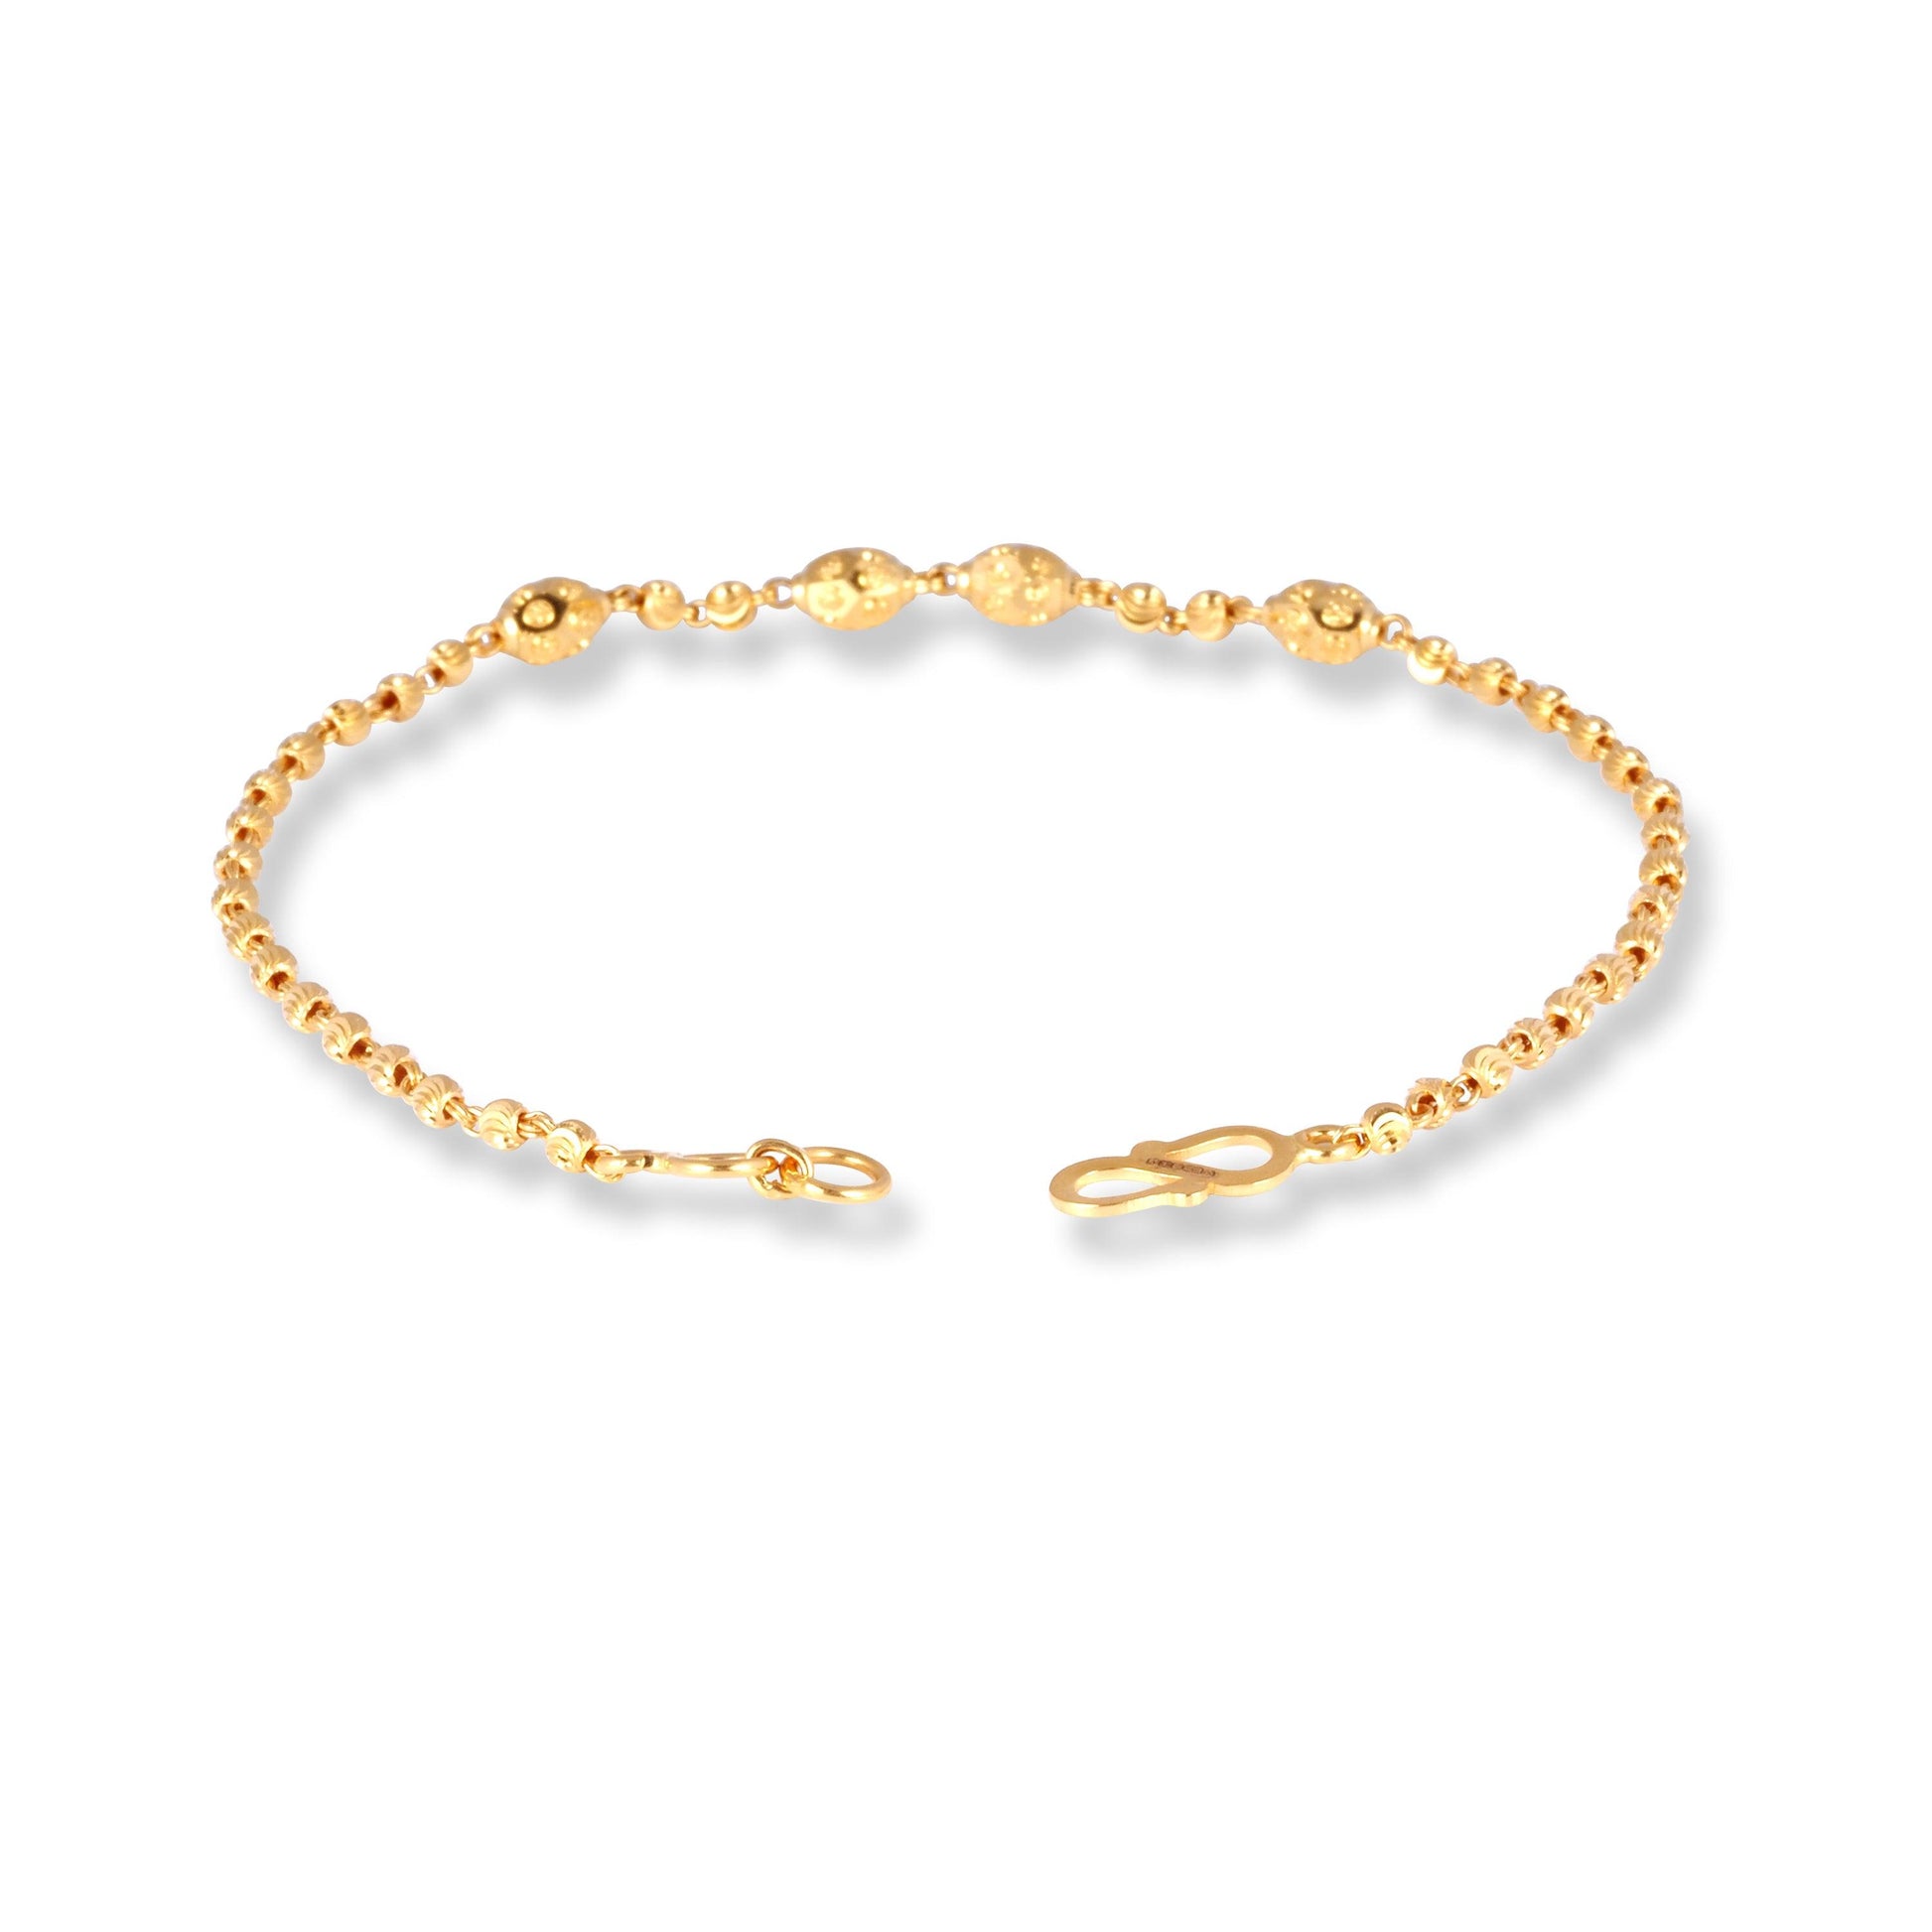 22ct Gold Ladies Bracelet with Oval Beads & S Clasp LBR-7155 - Minar Jewellers